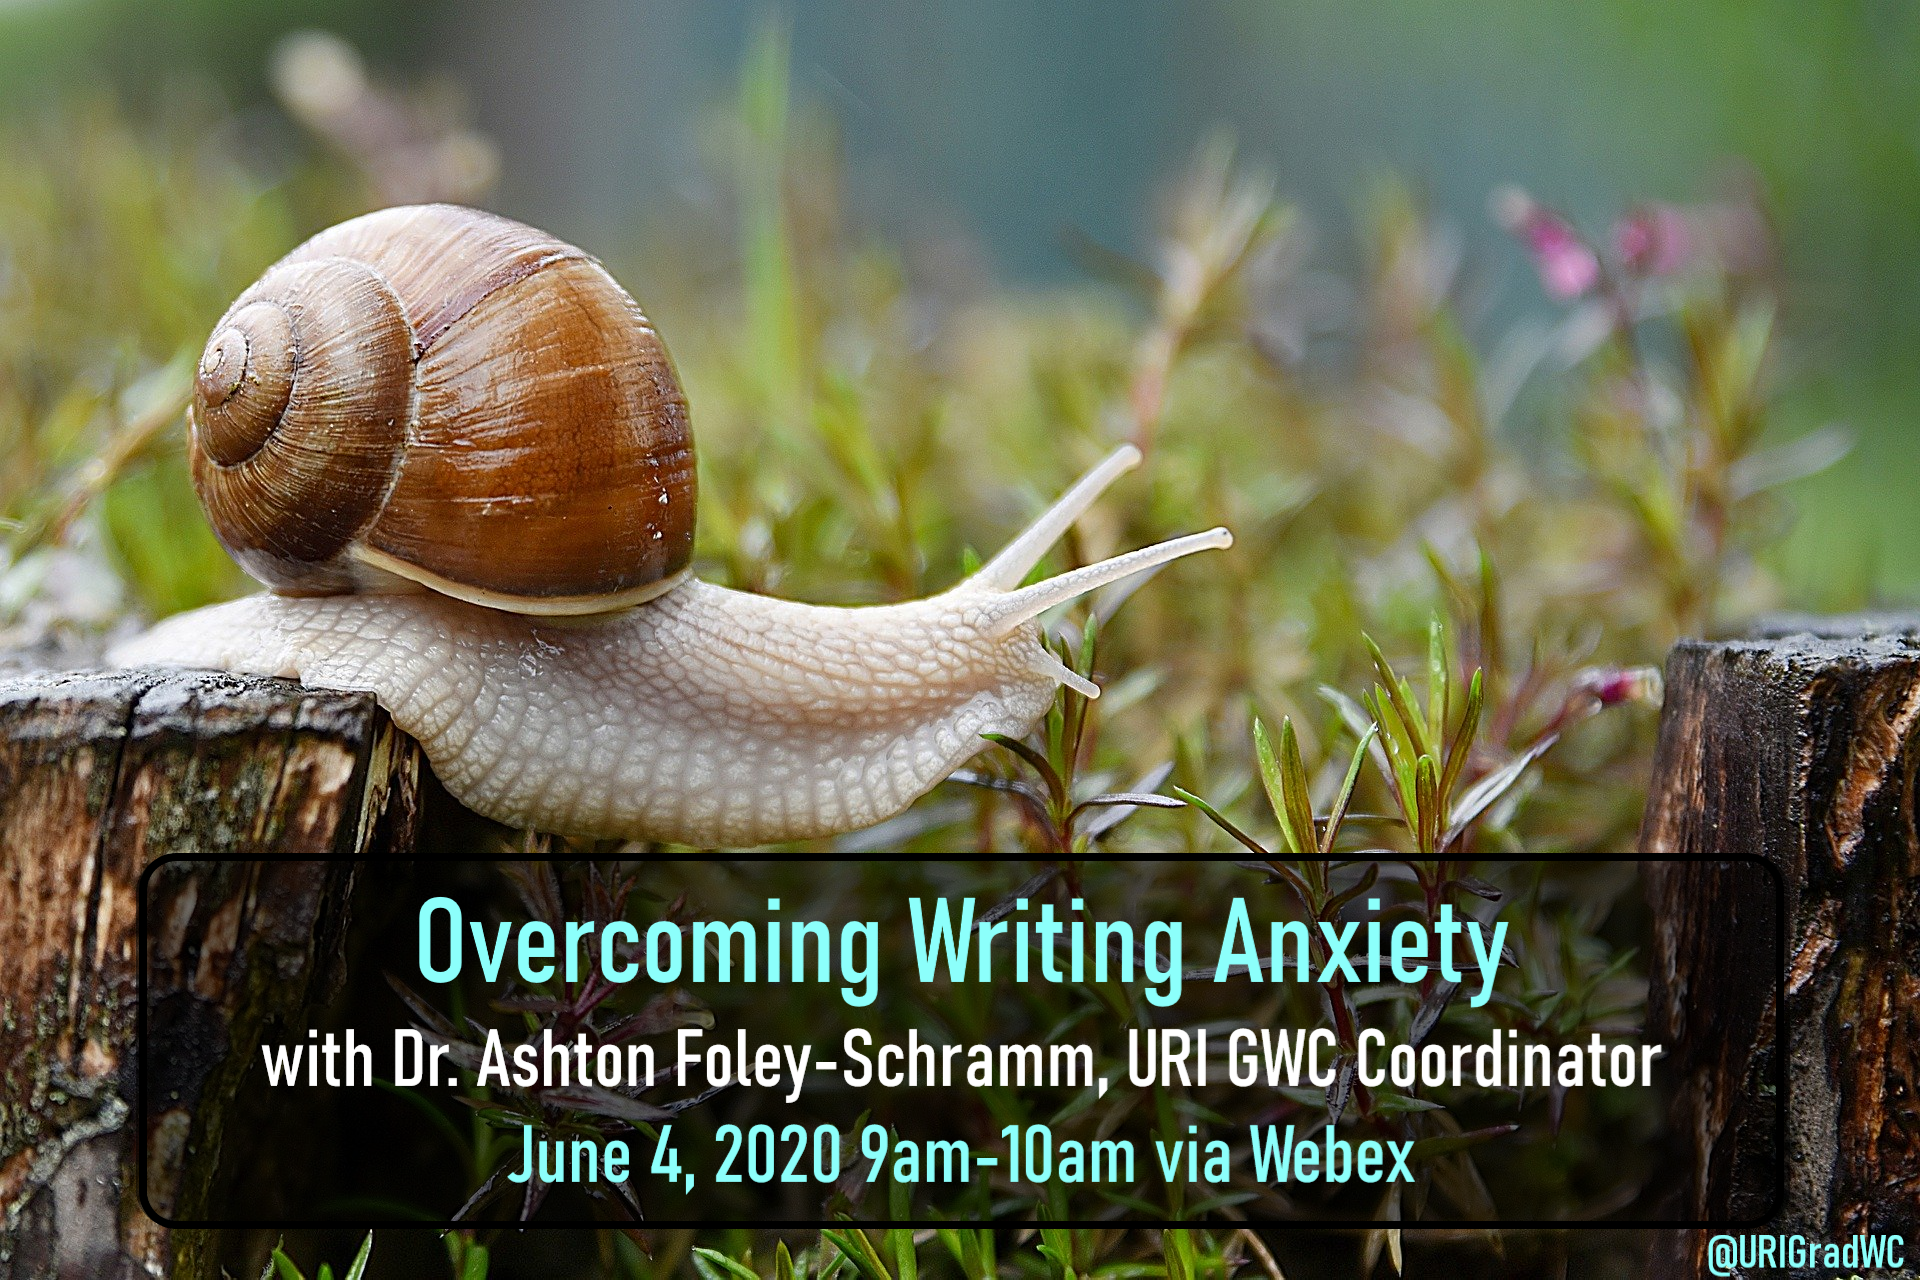 title image of a snail stretching across two logs for Overcoming Writing Anxiety workshop in June 2020